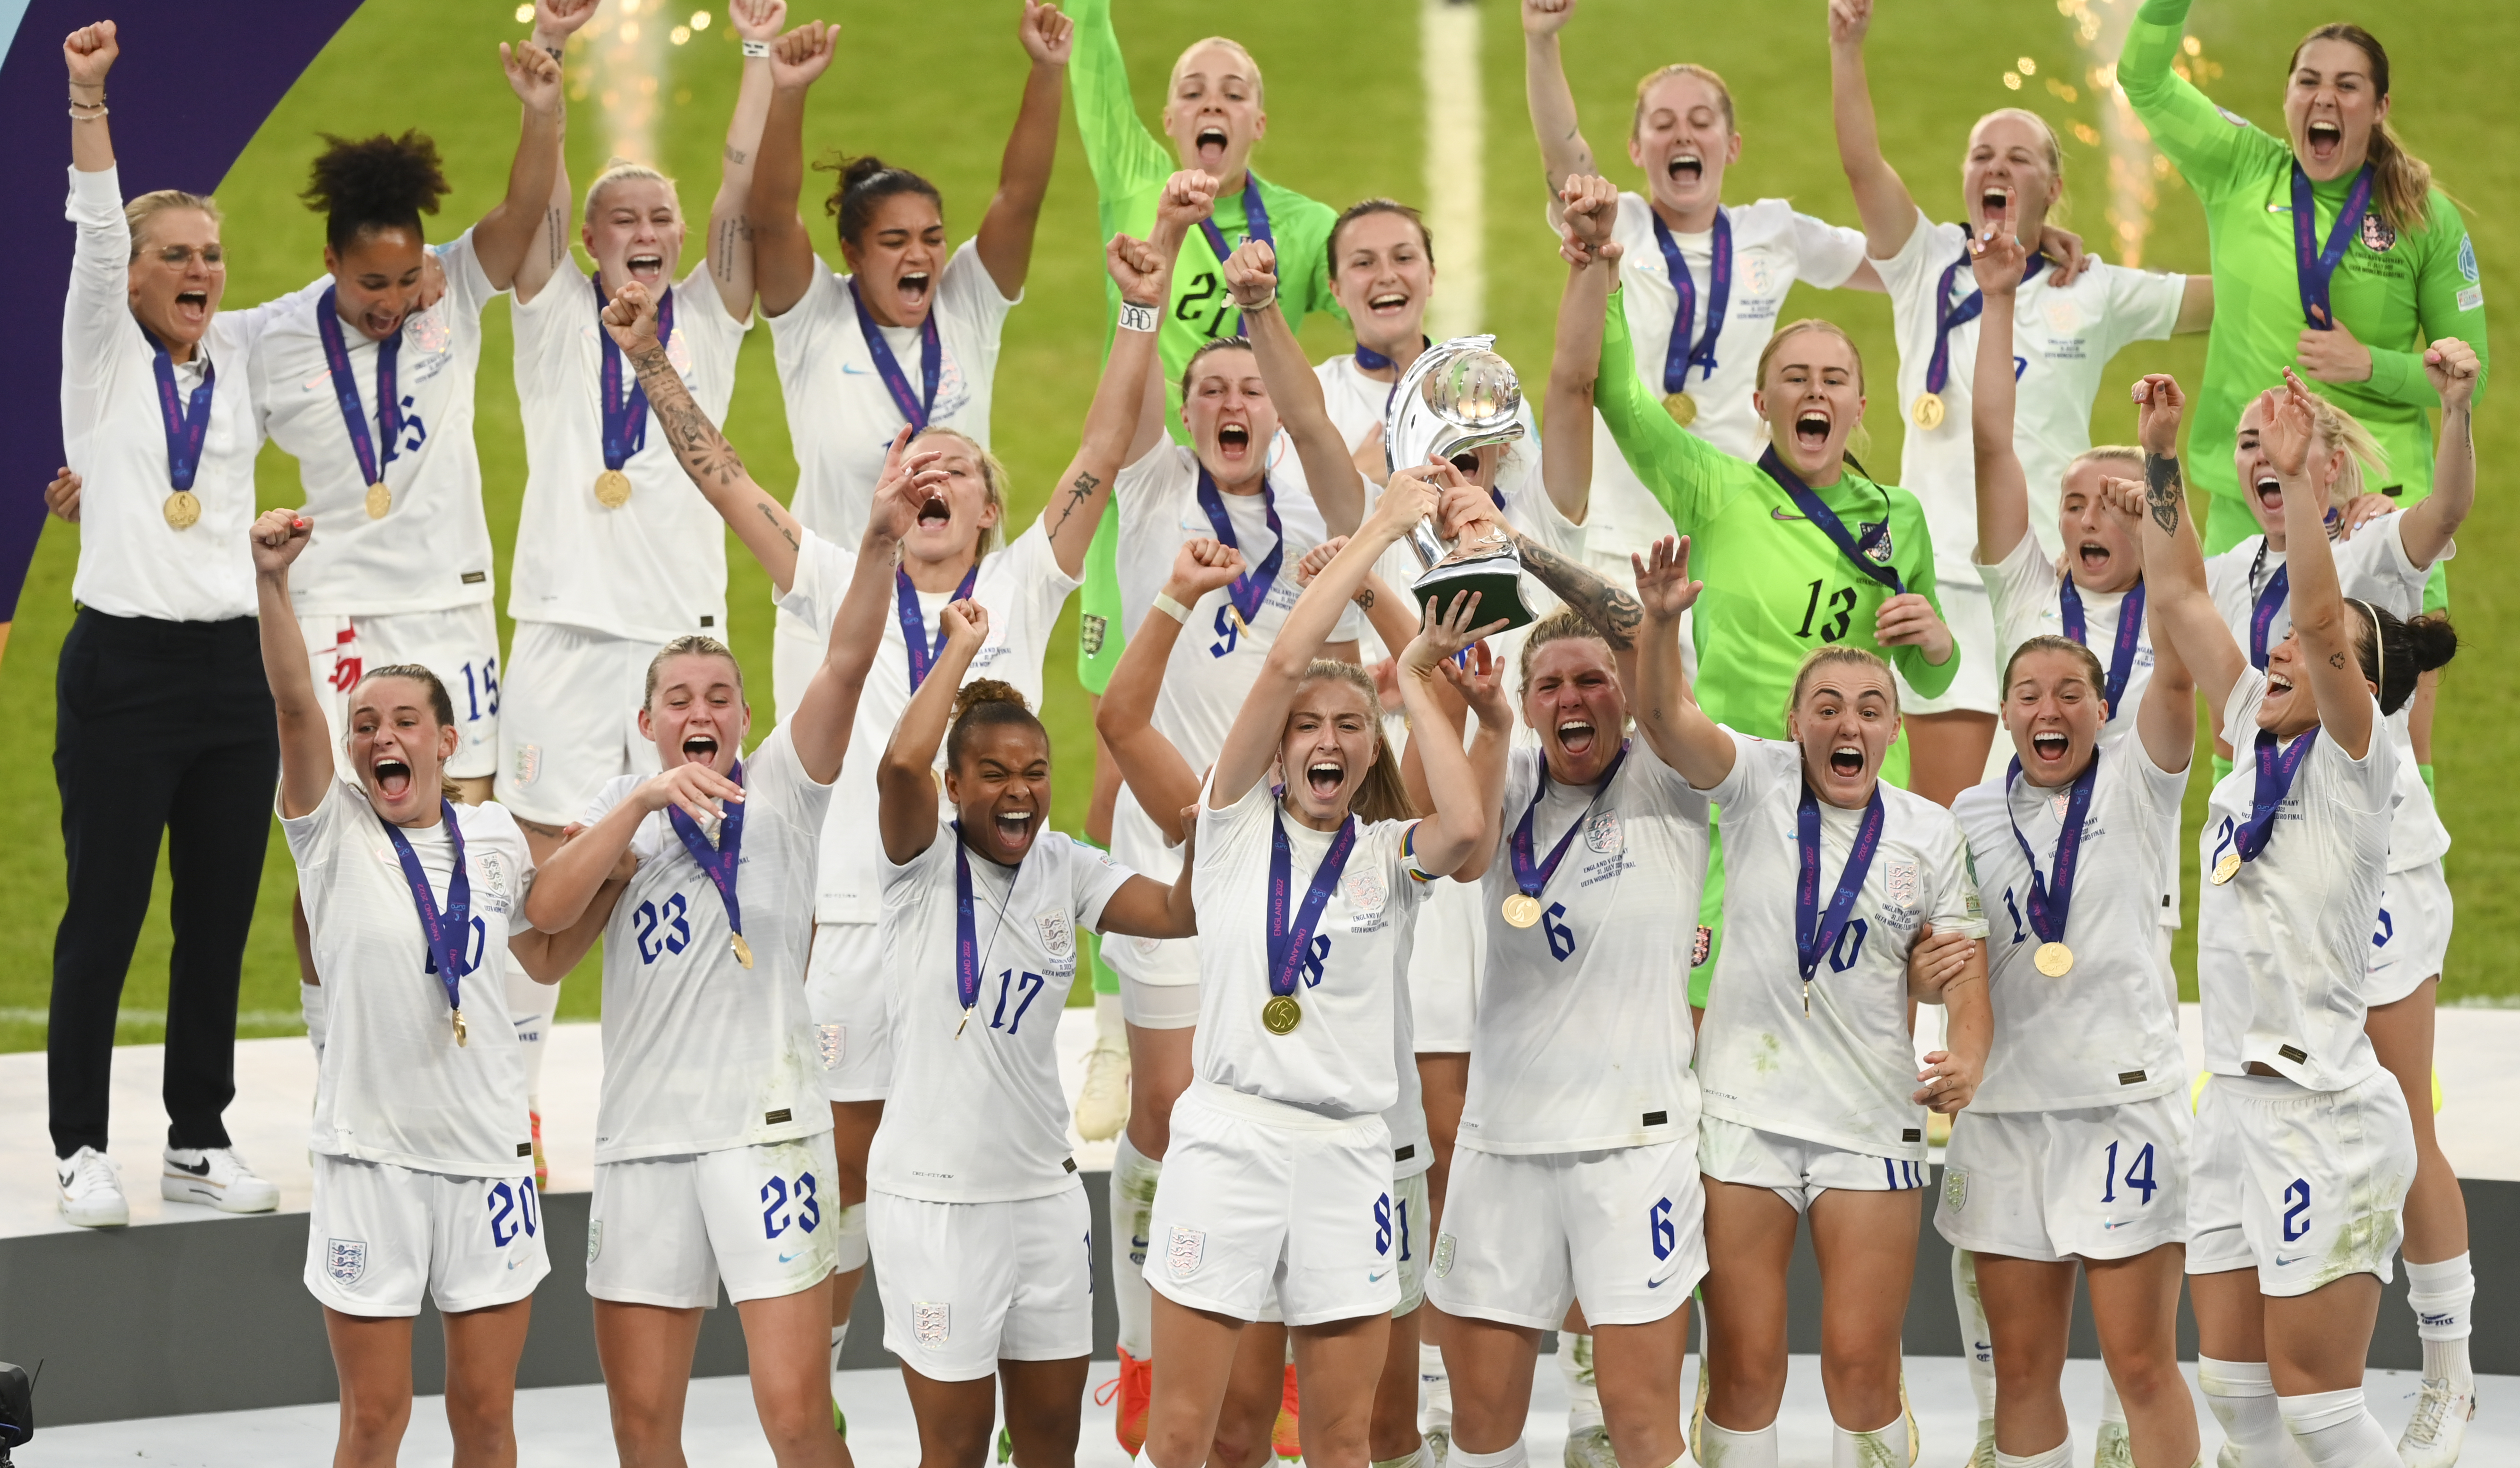 LONDON, ENGLAND - JULY 31: England captain Leah Williamson lifts the trophy with team mates after winning the UEFA Women's Euro 2022 final match between England and Germany at Wembley Stadium on July 31, 2022 in London, England. (Photo by Michael Regan/Getty Images)